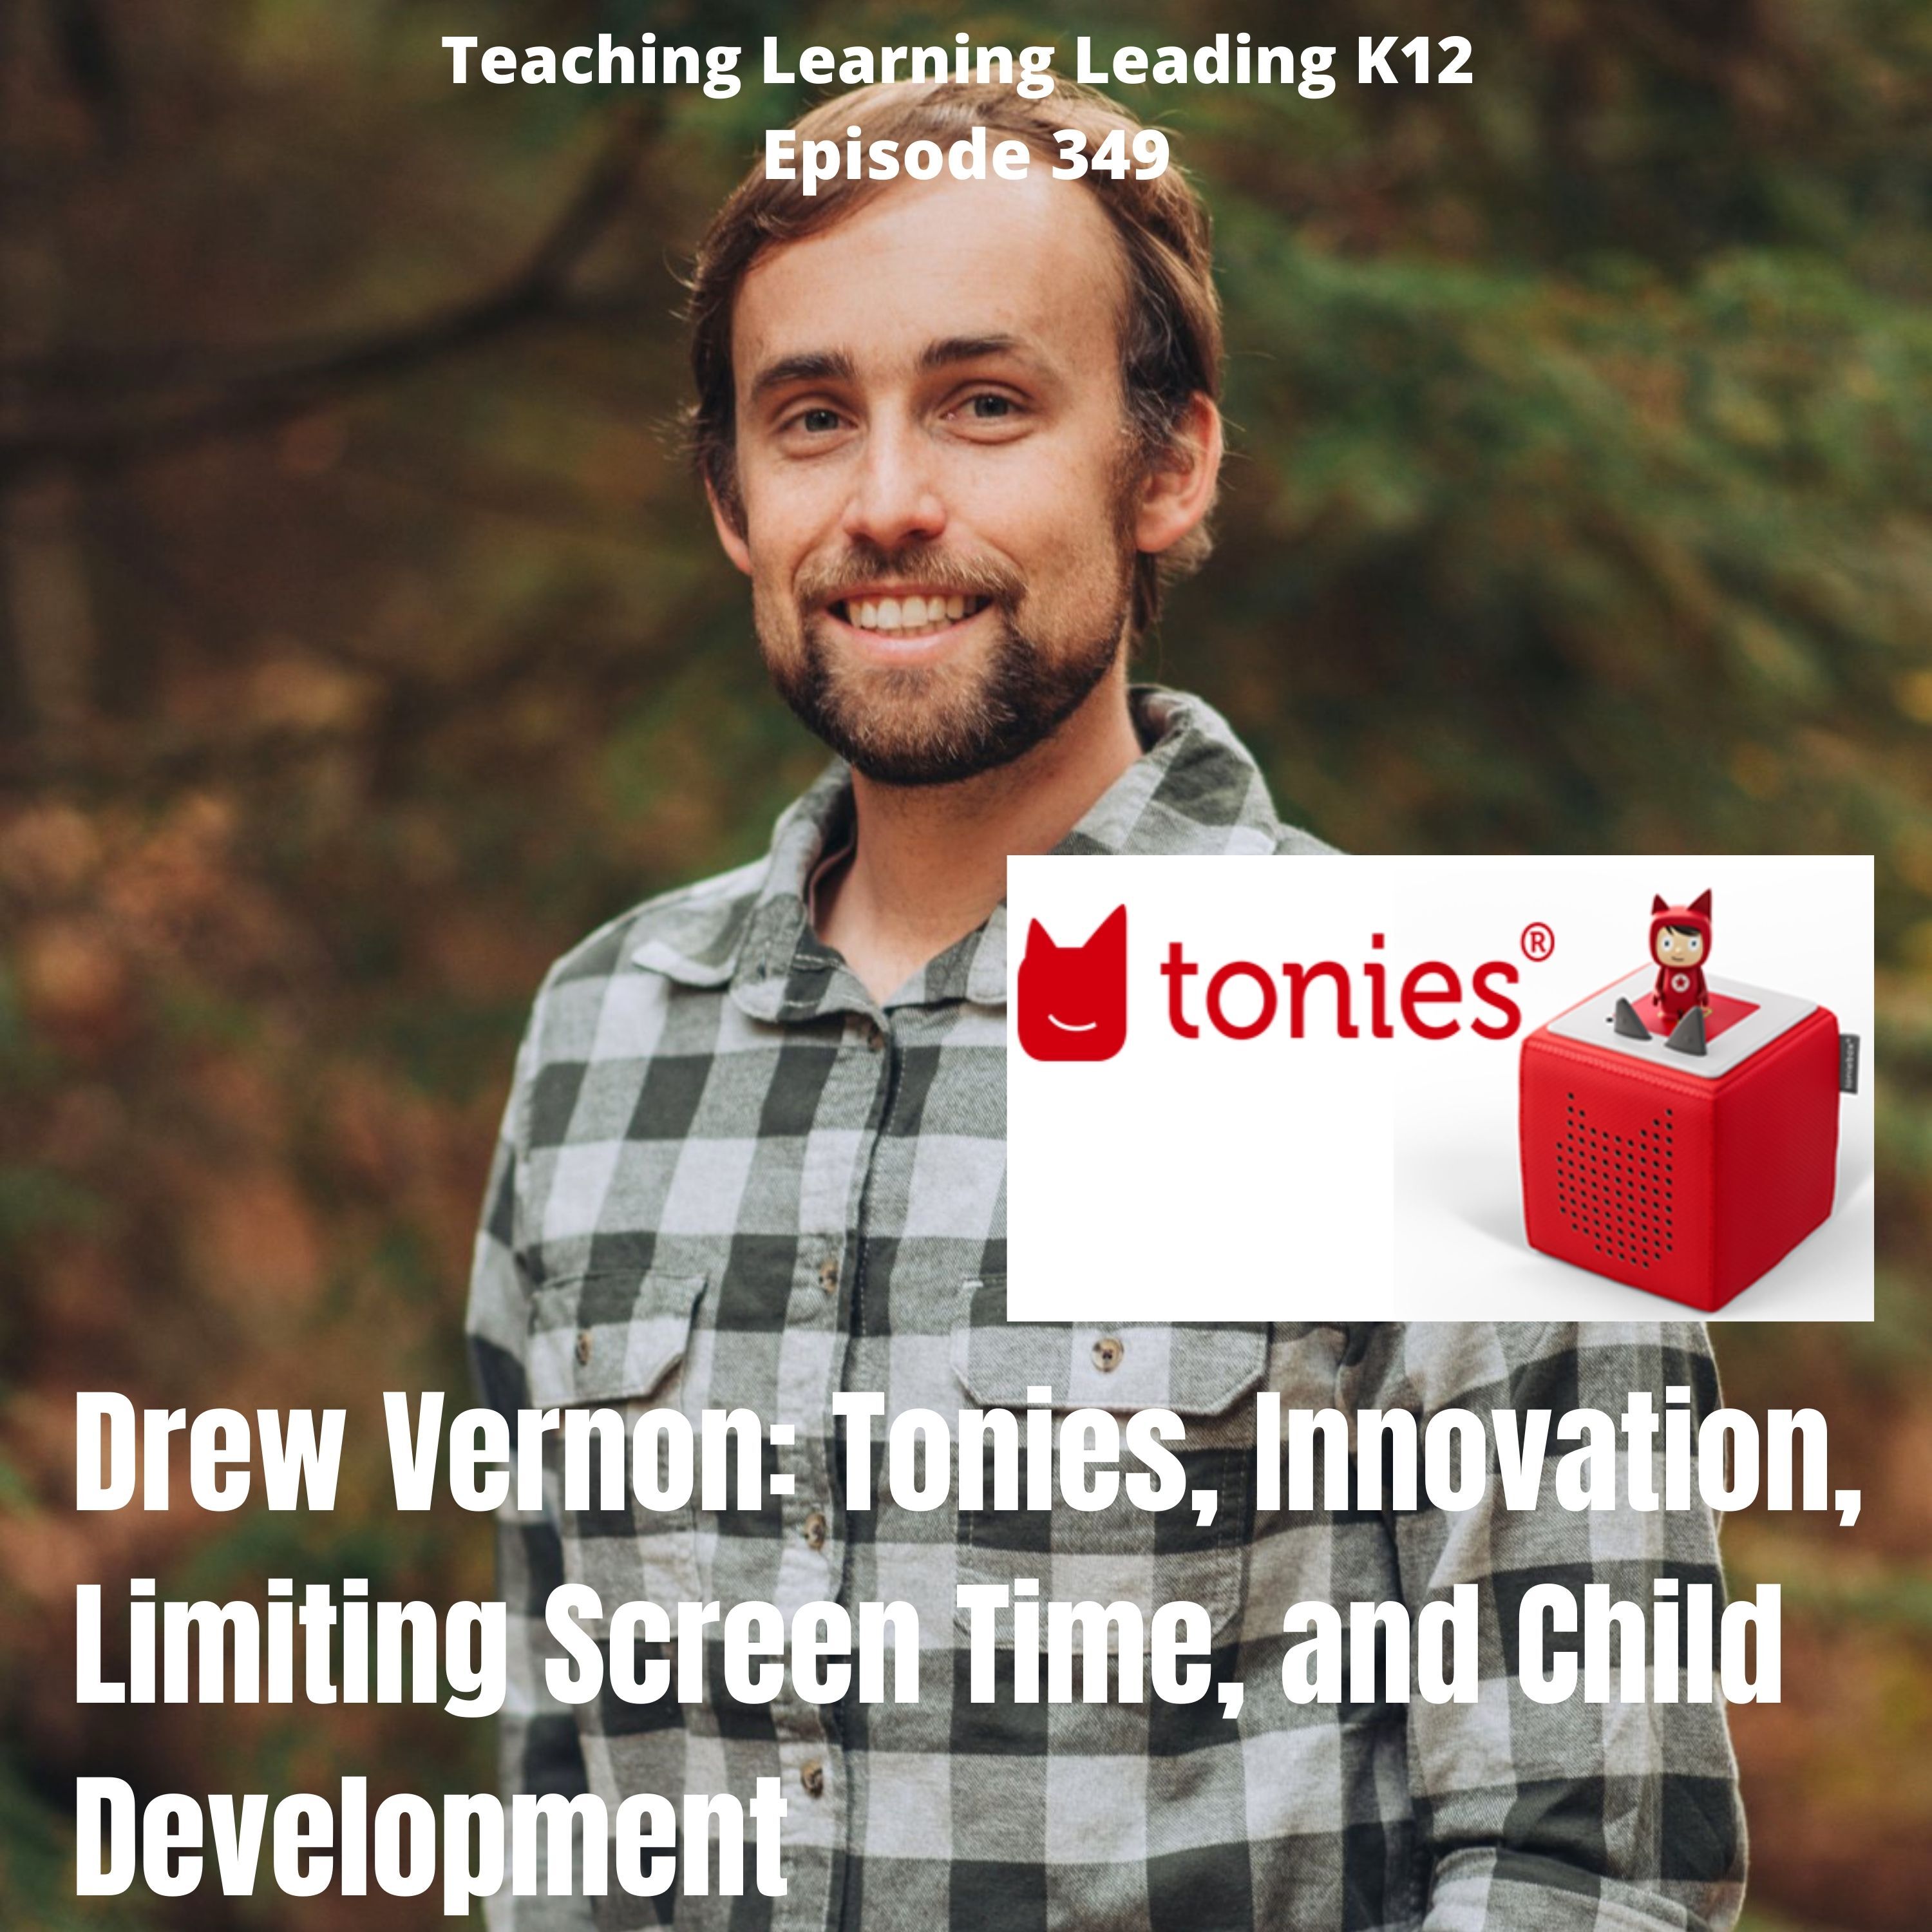 Drew Vernon: Tonies, Innovation, Limiting Screen Time, and Child Development - 349 Image